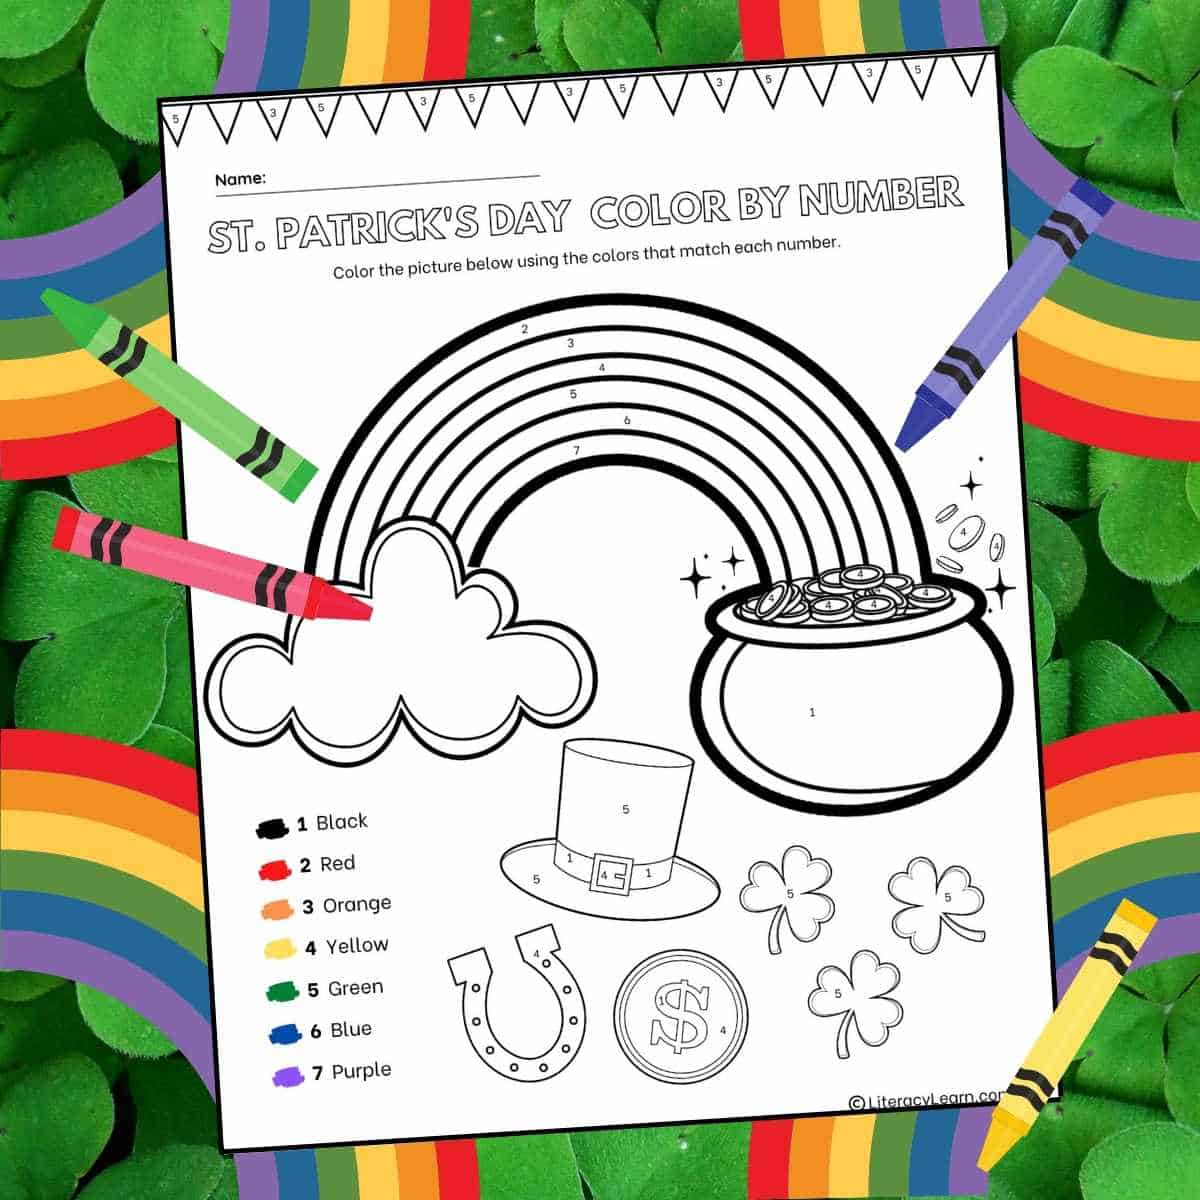 Cute St. Patrick's Day Color by Number - Download, Print Now!